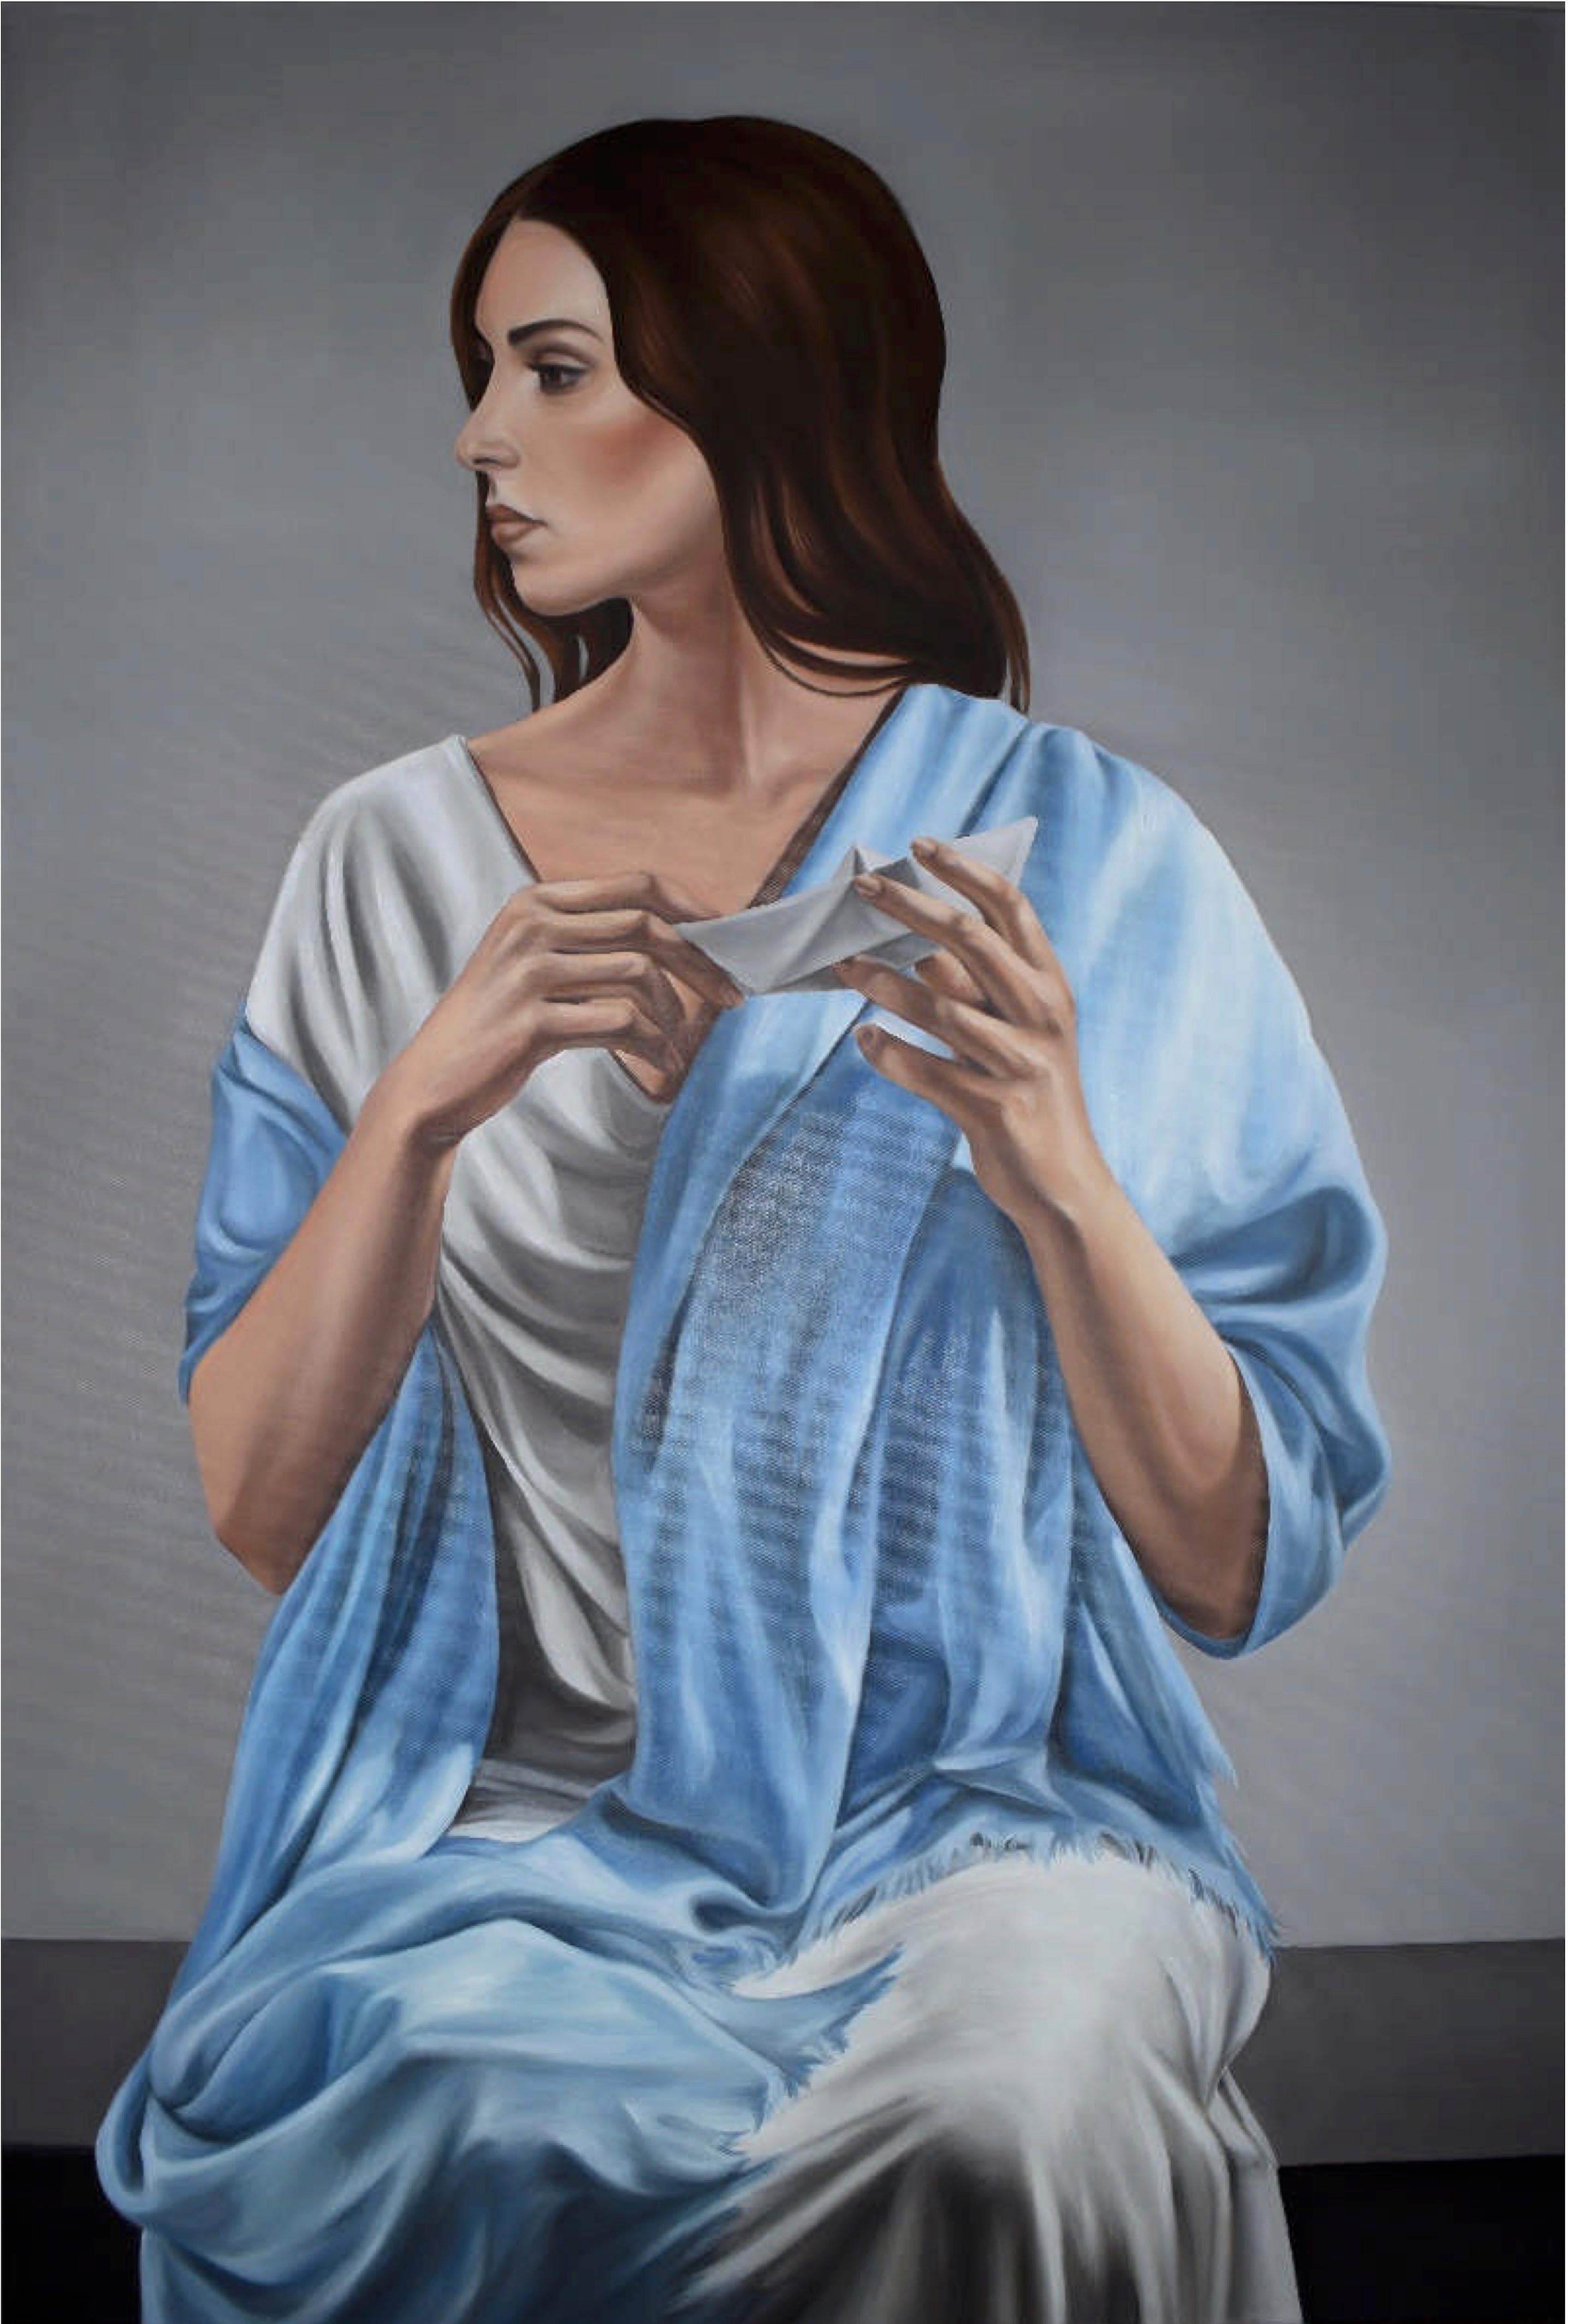 Yousra Hafad						 Figurative Painting - "Another Land" Oil painting 47" x 32" inch by Yousra Hafad					